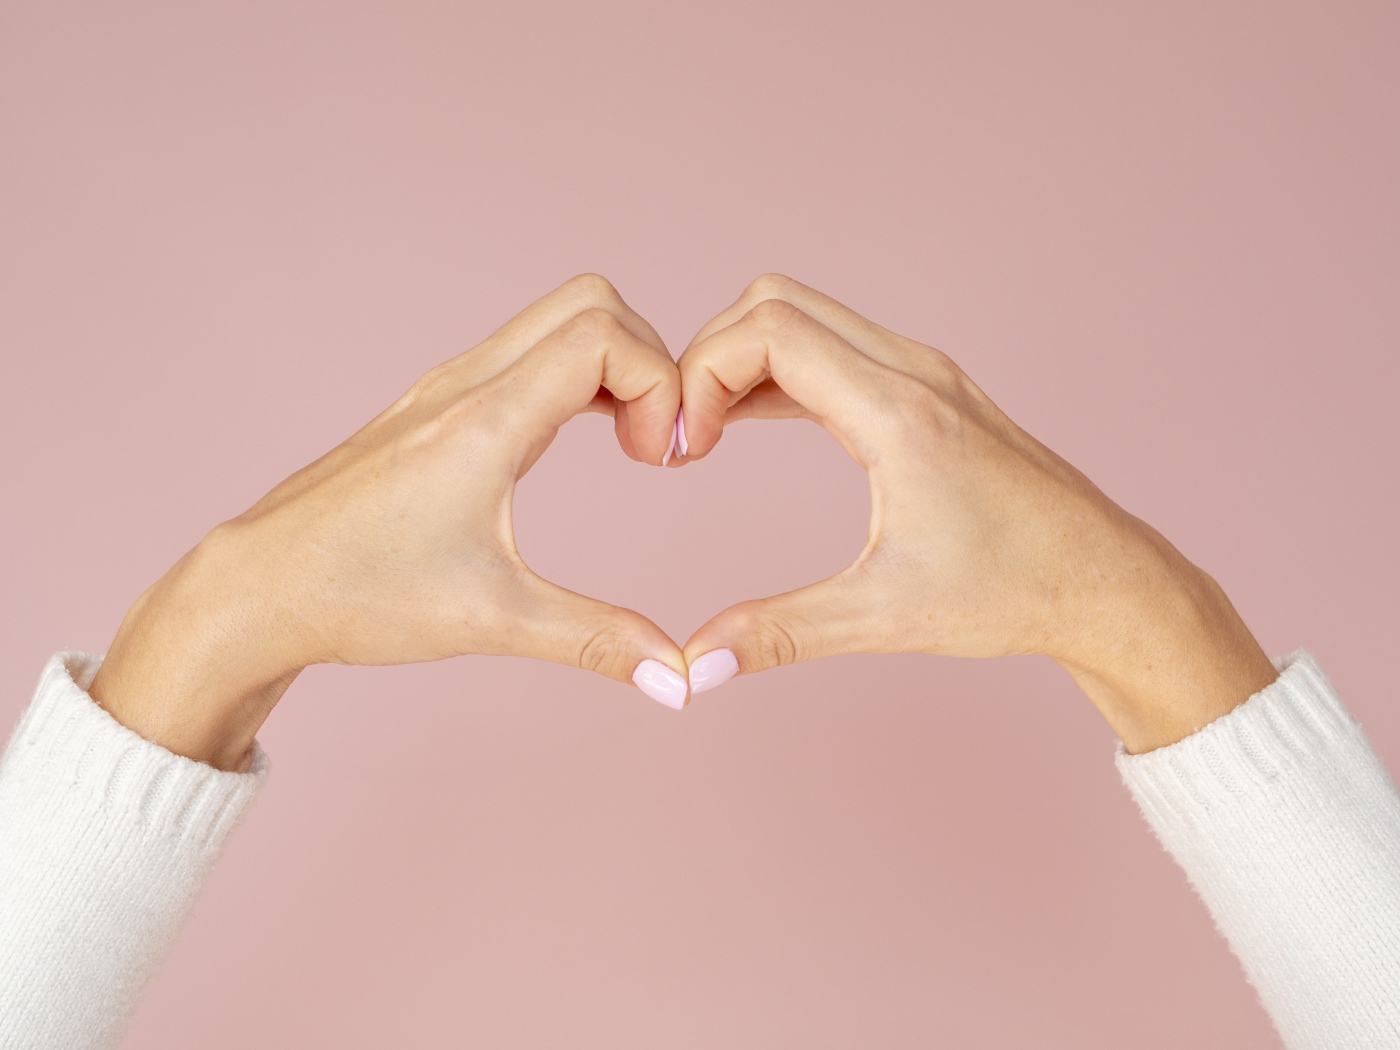 Girl making a heart with her hands on a pink background